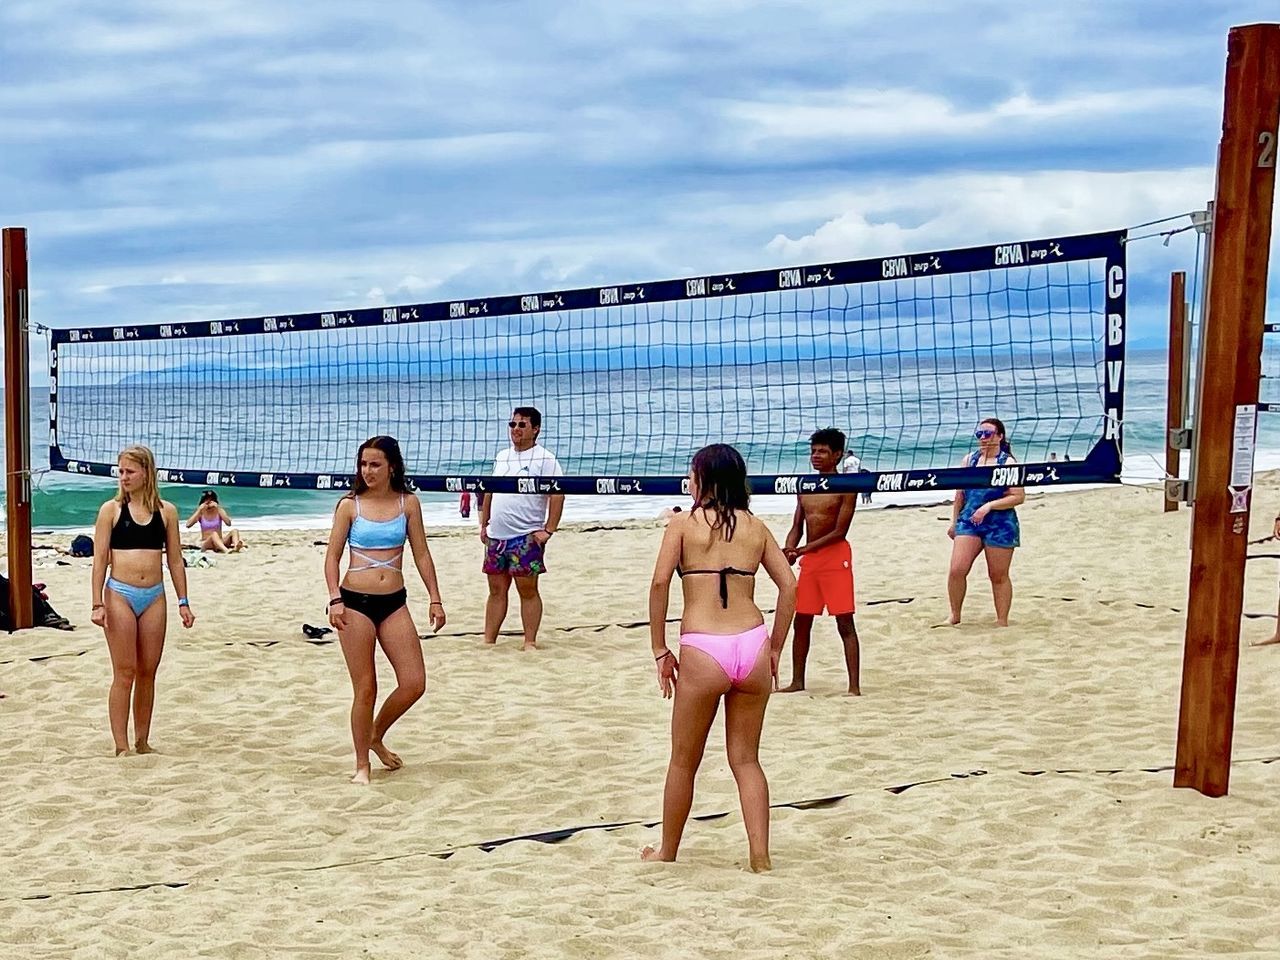 beach volleyball, volleyball, net sports, group of people, beach, land, sky, ball game, sand, sports, team sport, nature, sea, adult, women, men, clothing, leisure activity, lifestyles, cloud, holiday, water, young adult, summer, vacation, trip, player, day, swimwear, motion, large group of people, full length, outdoors, crowd, fun